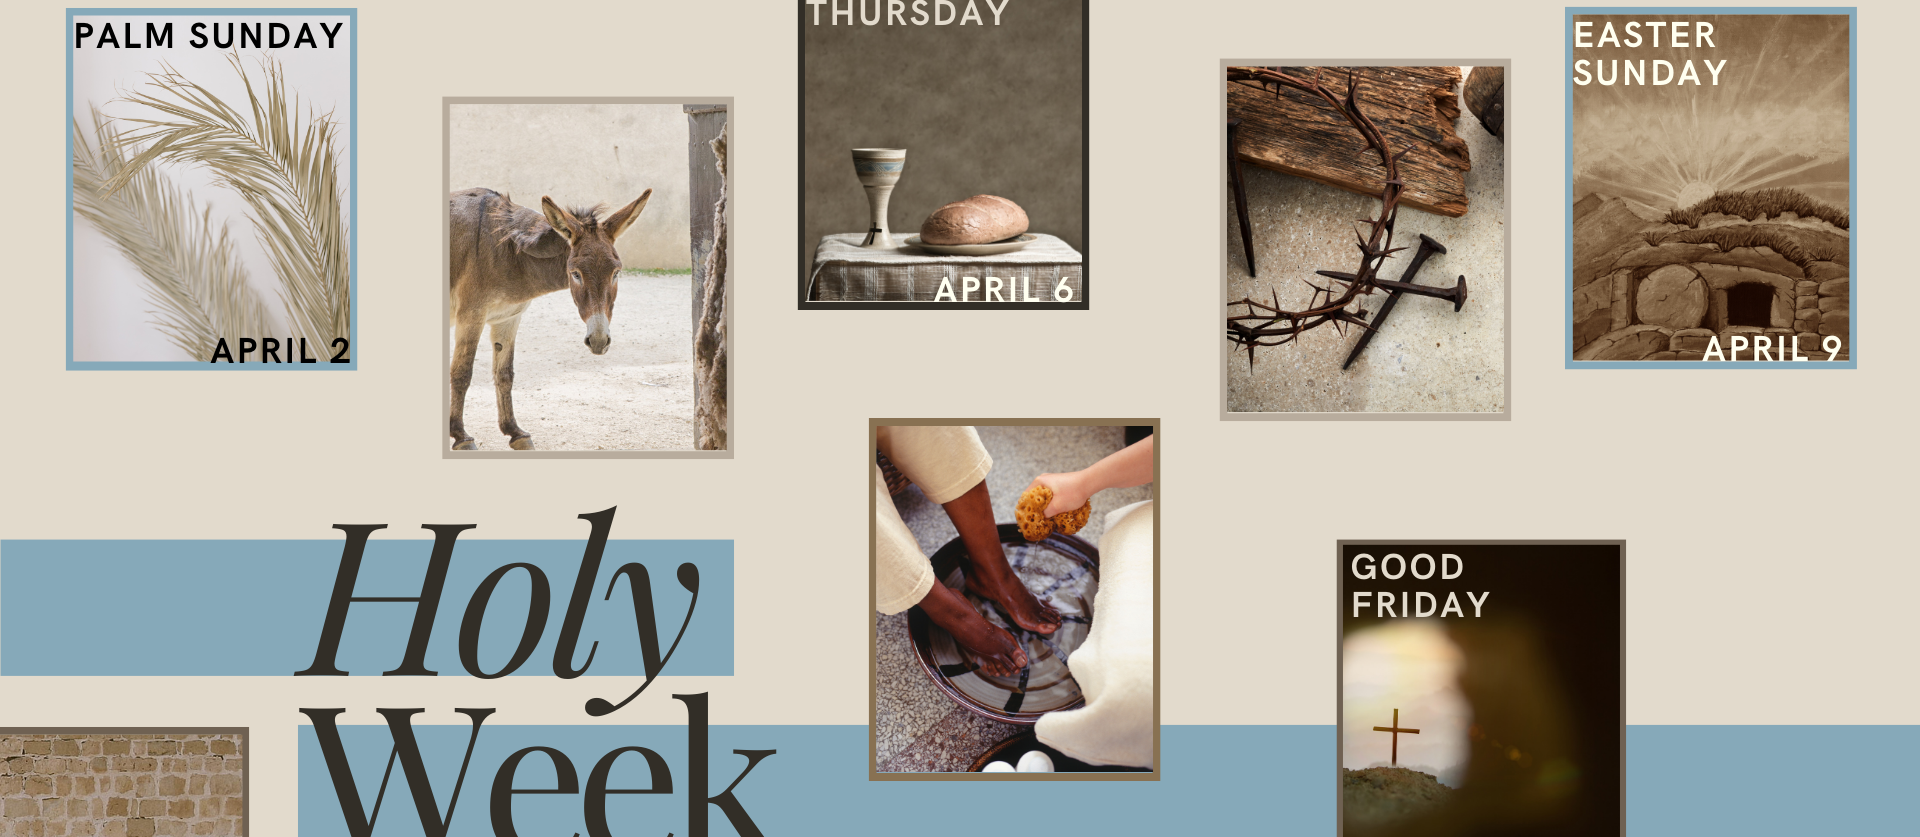 Holy Week: April 2nd-9th